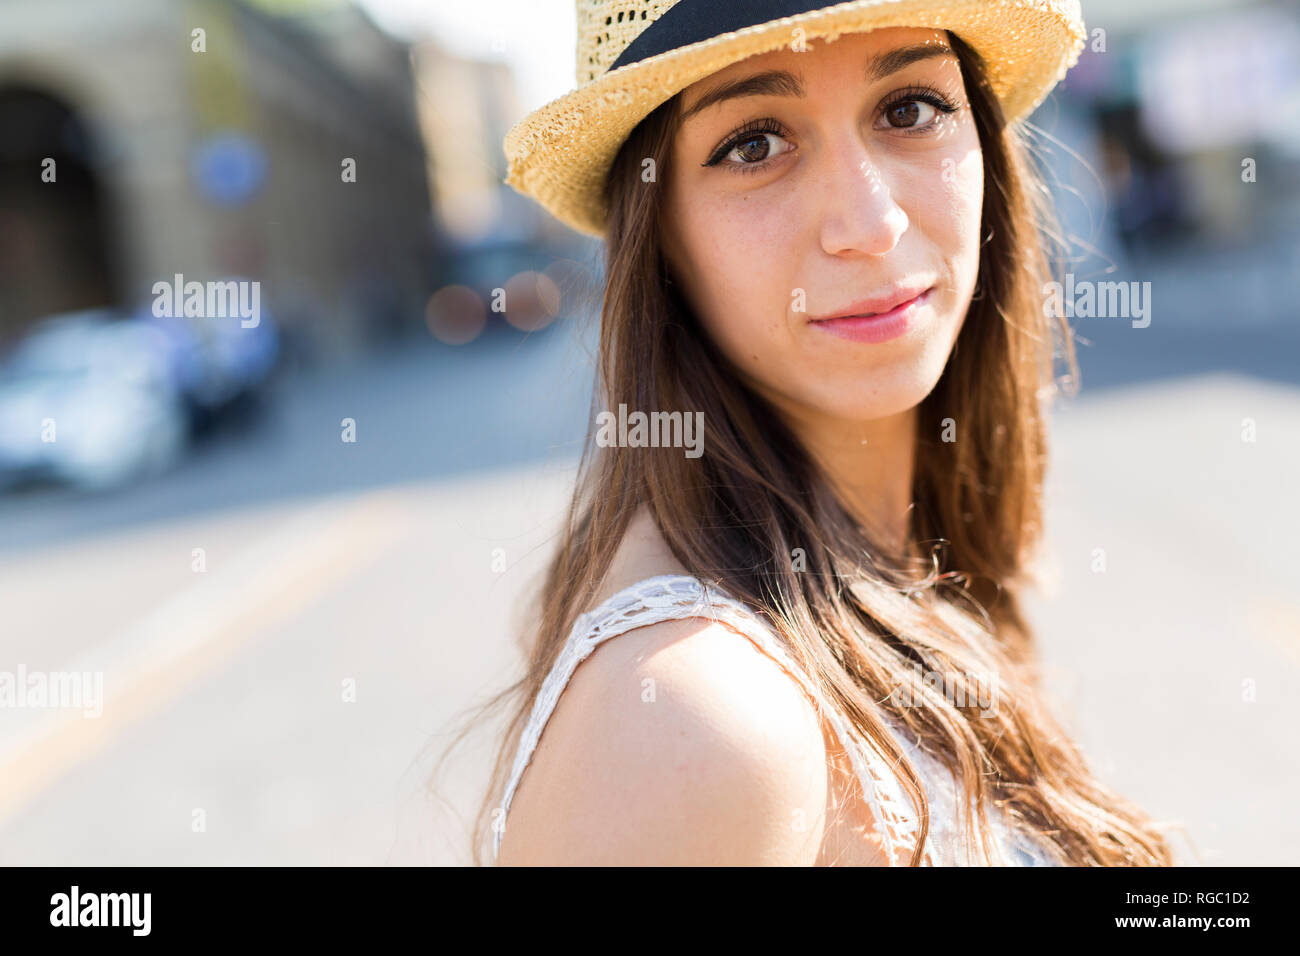 Portrait of young woman wearing straw hat Stock Photo